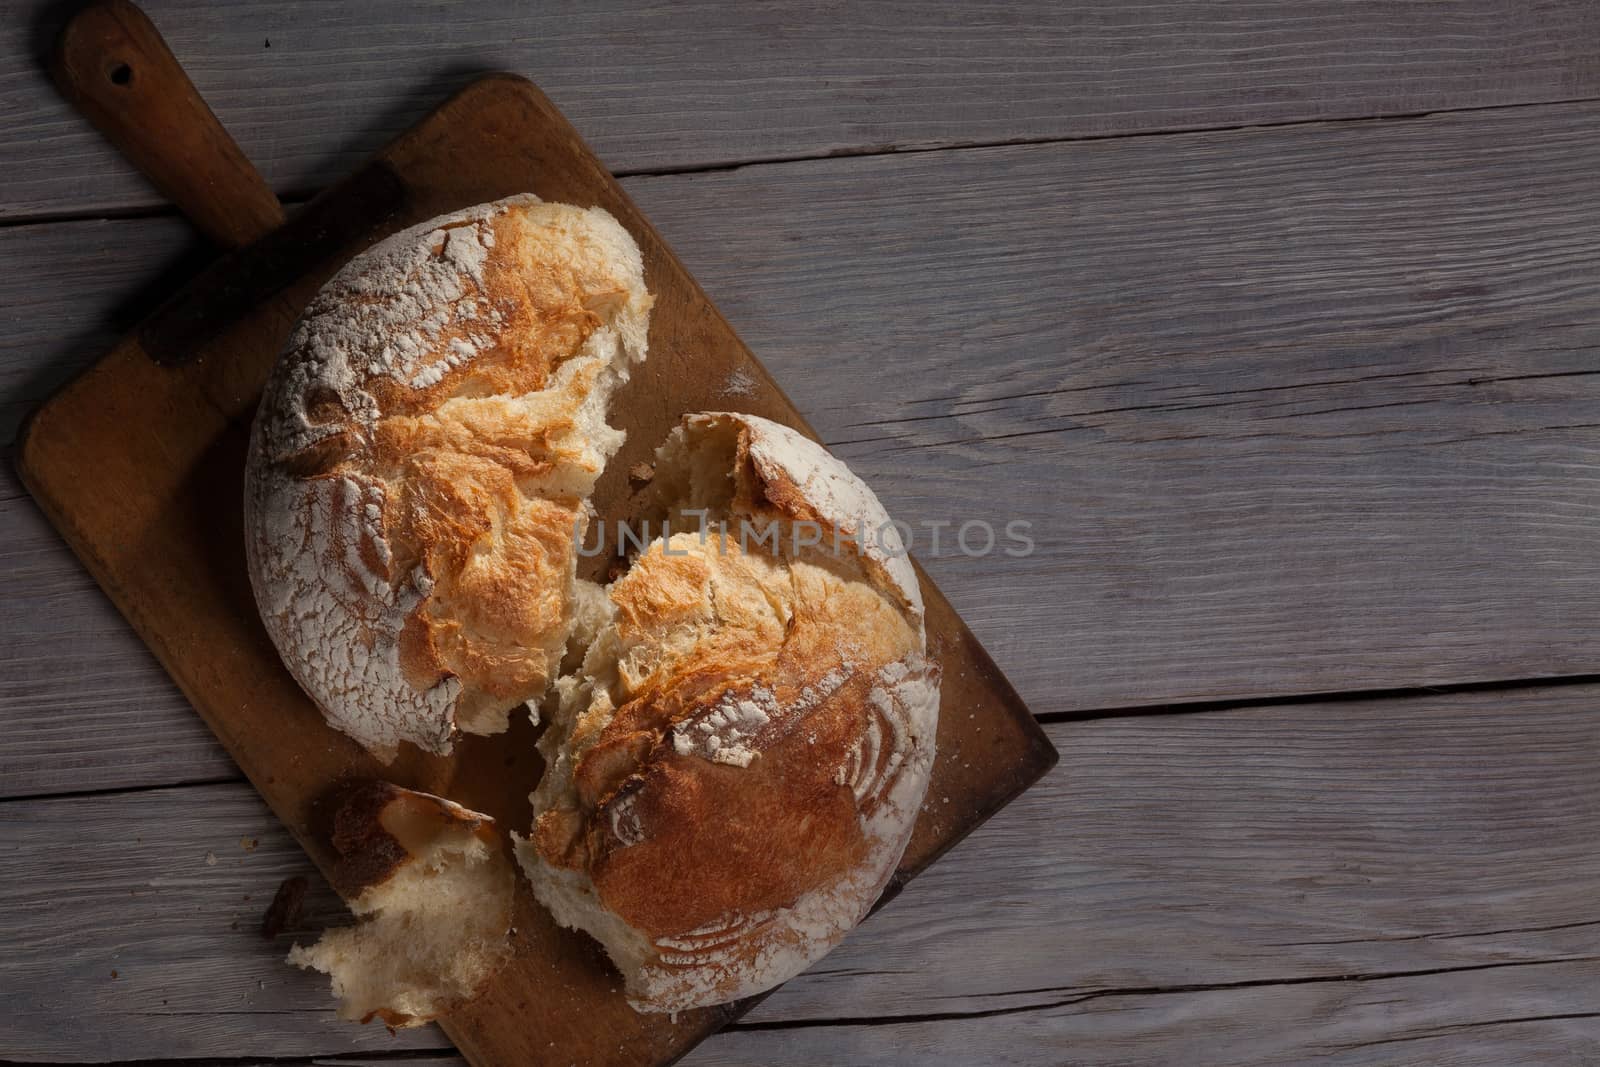 Torned crannied rustical homemade bread loaf on old cutting board over grey wooden table. Dark background with a free space.